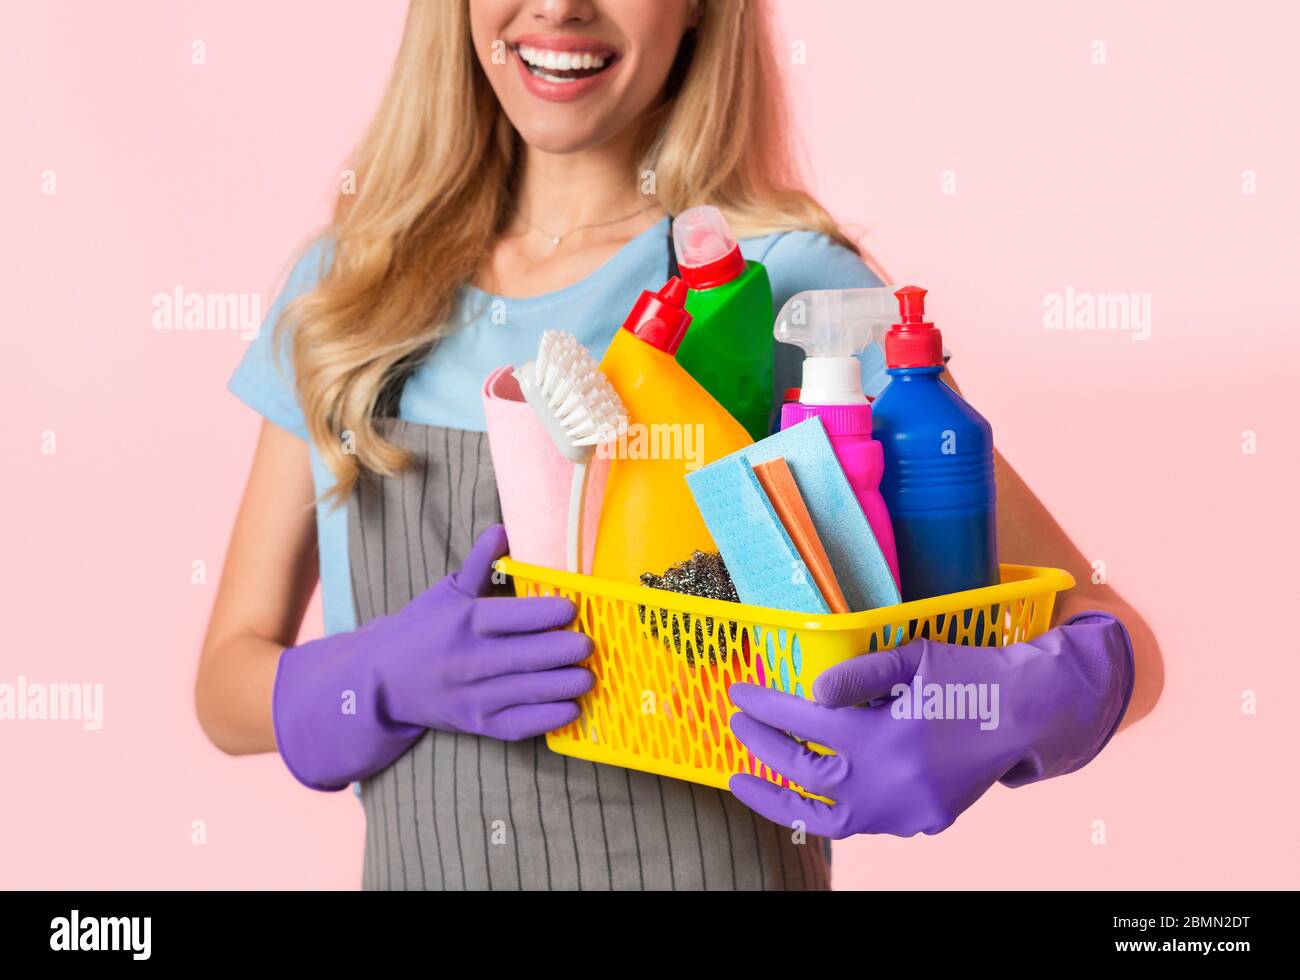 Focus on basket of cleaning supplies. Housewife in apron and purple rubber gloves Stock Photo